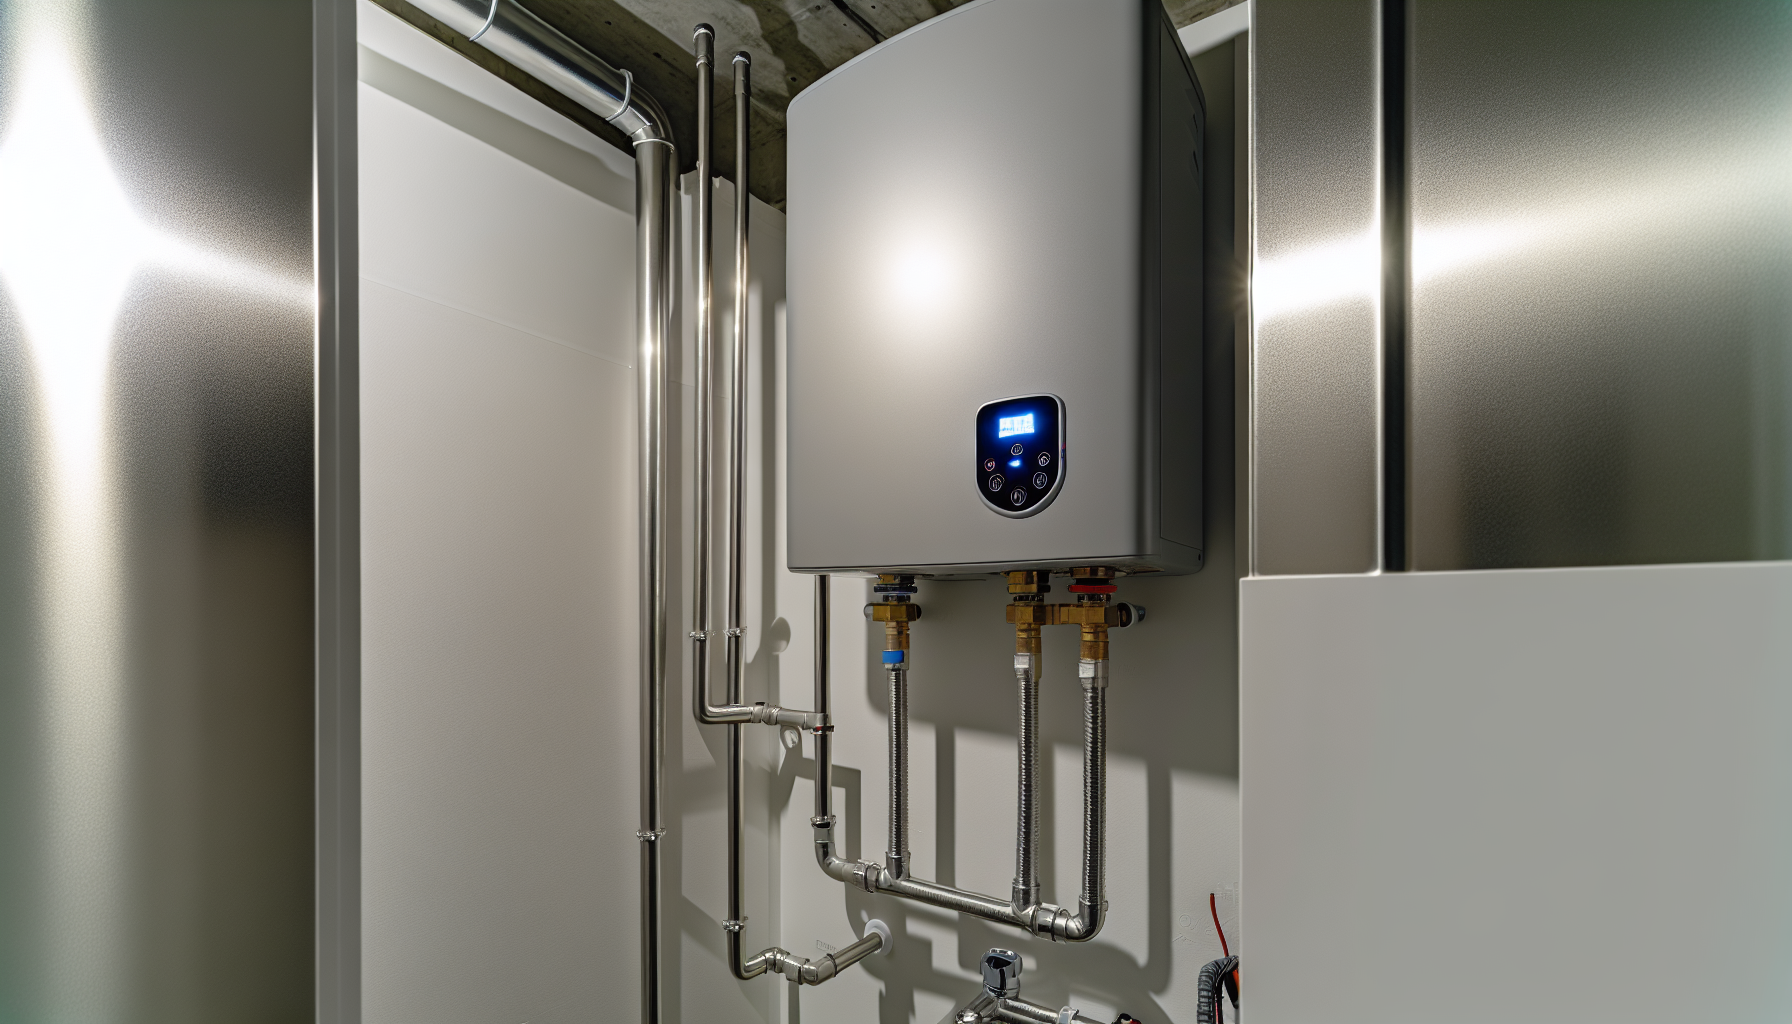 Switching to tankless water heater for on-demand hot water